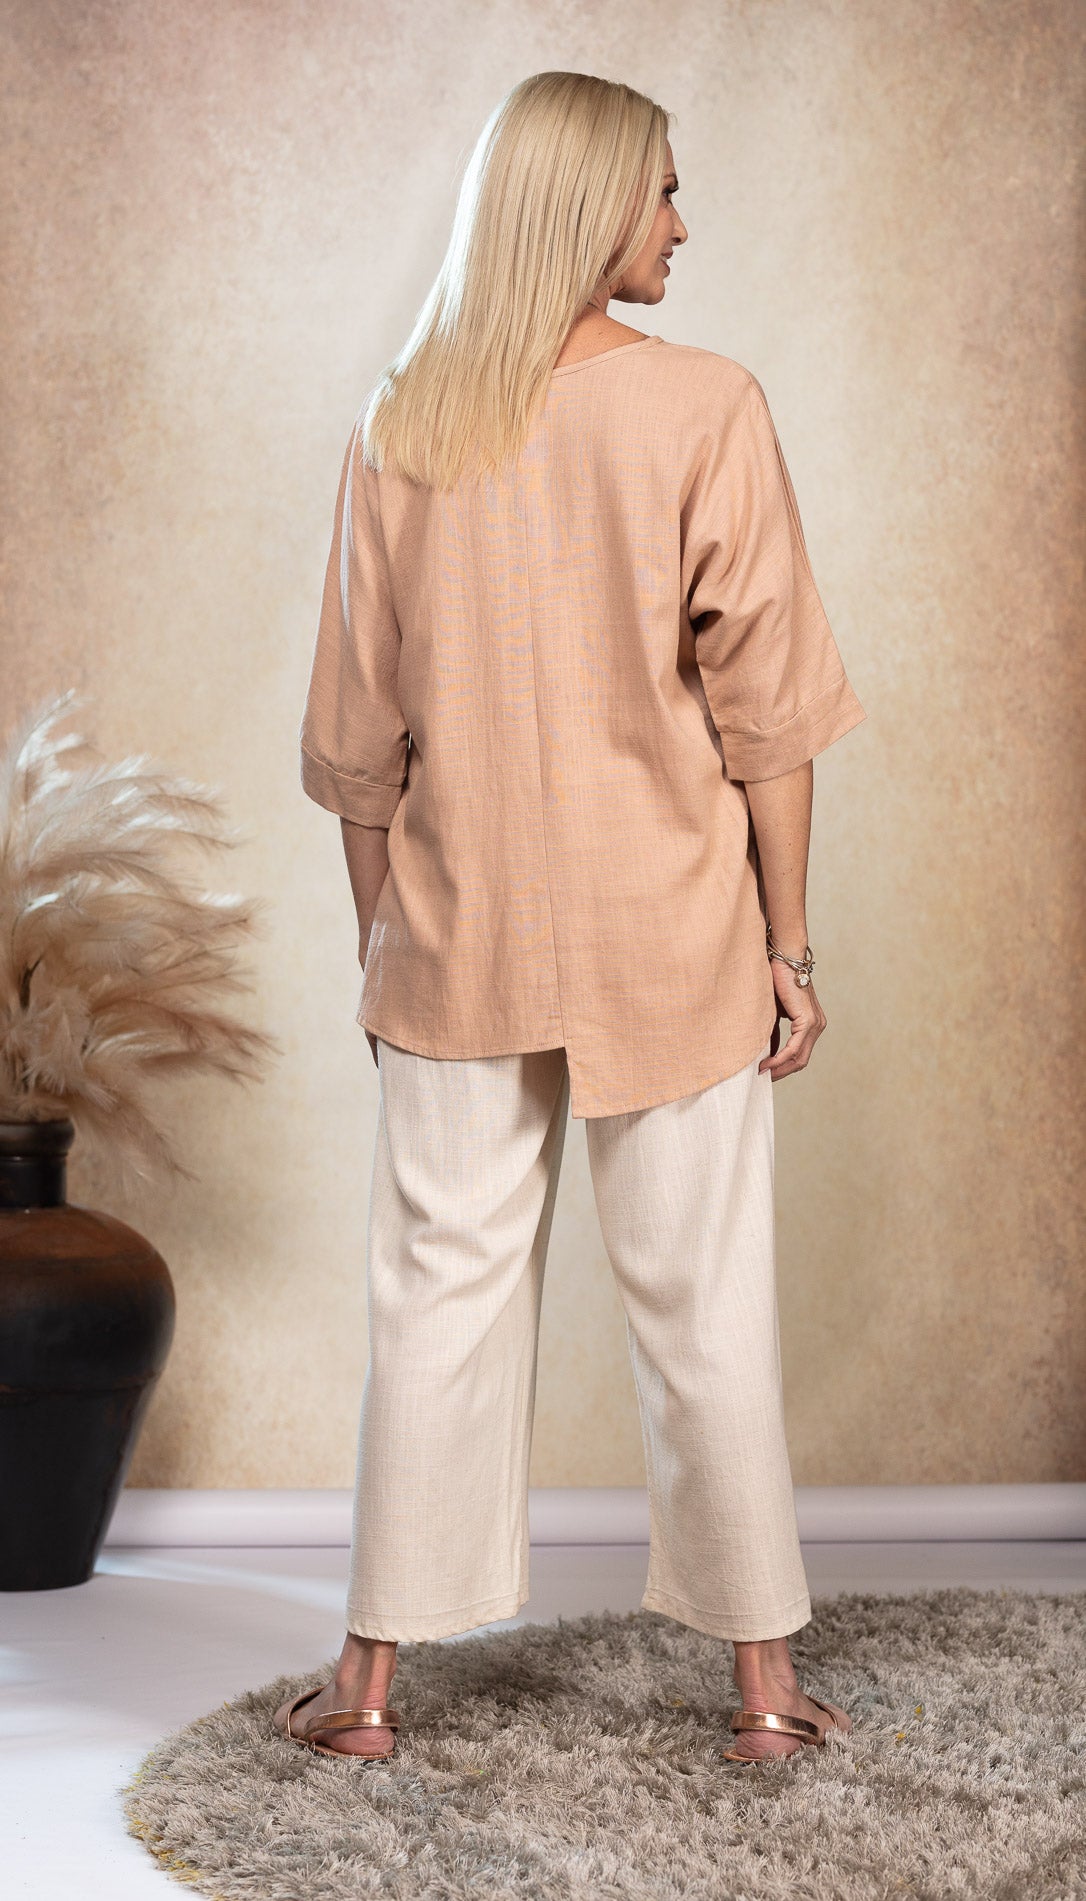 Geo Linen Top in Dusk freeshipping - White Amber the Label